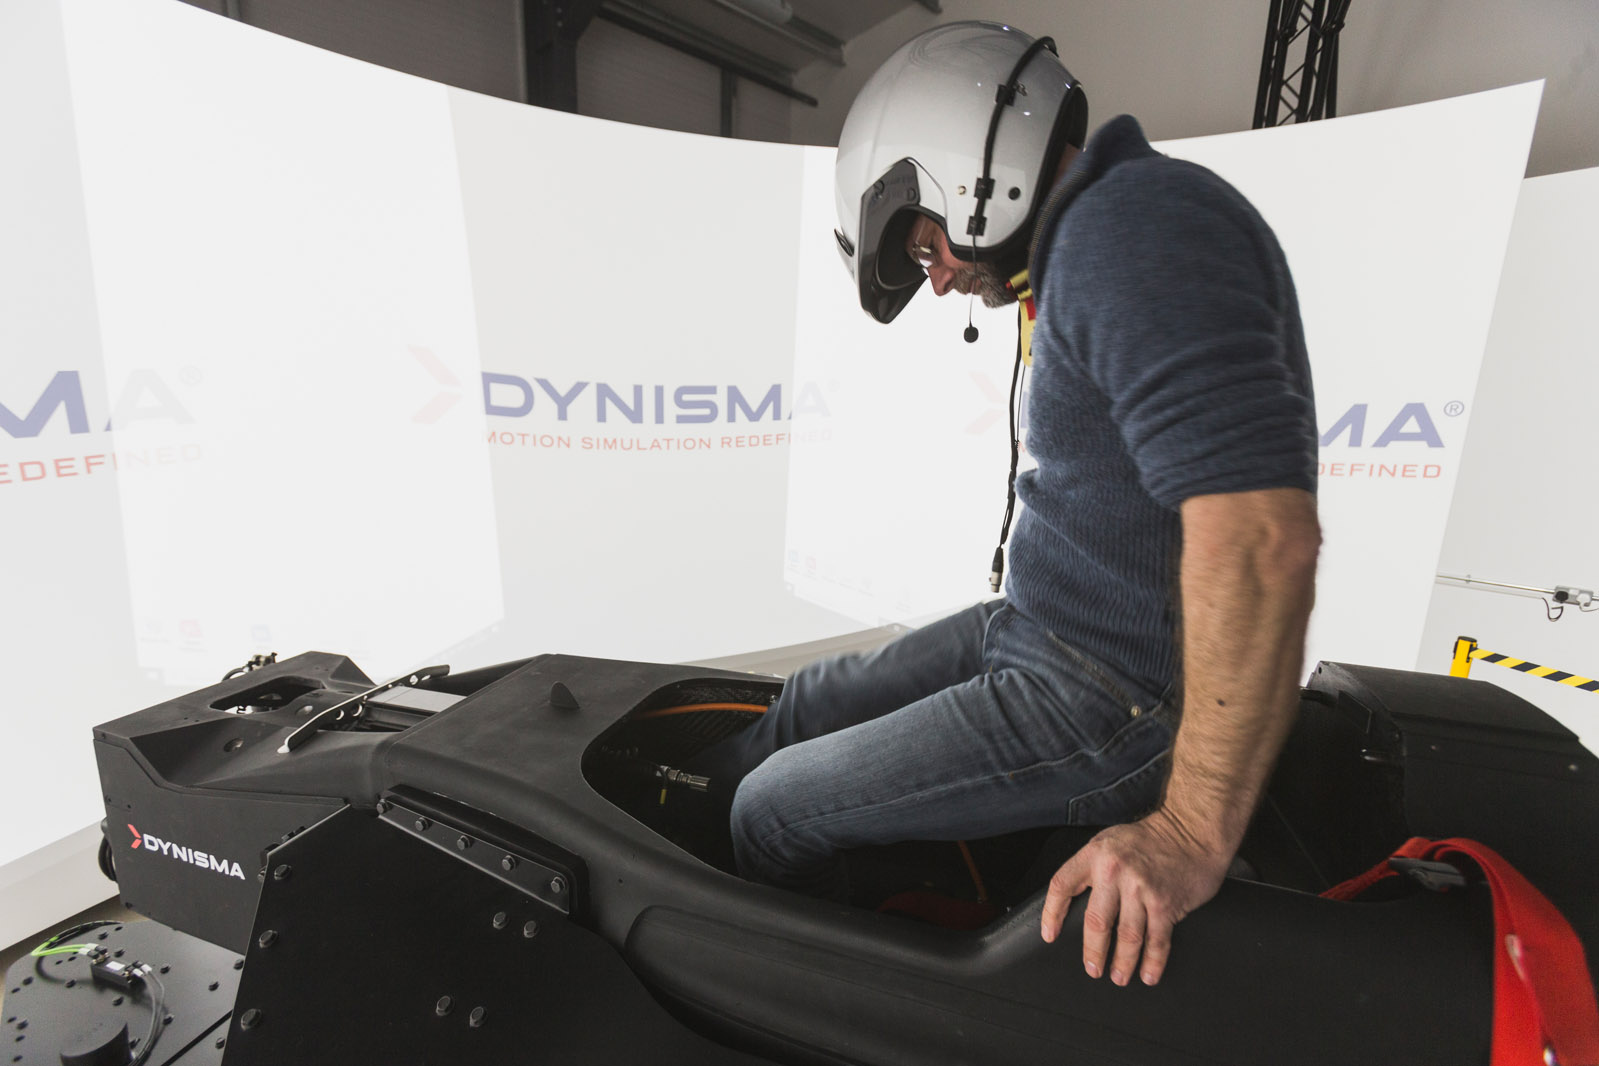 Behind the wheel of the world's most advanced racing simulator